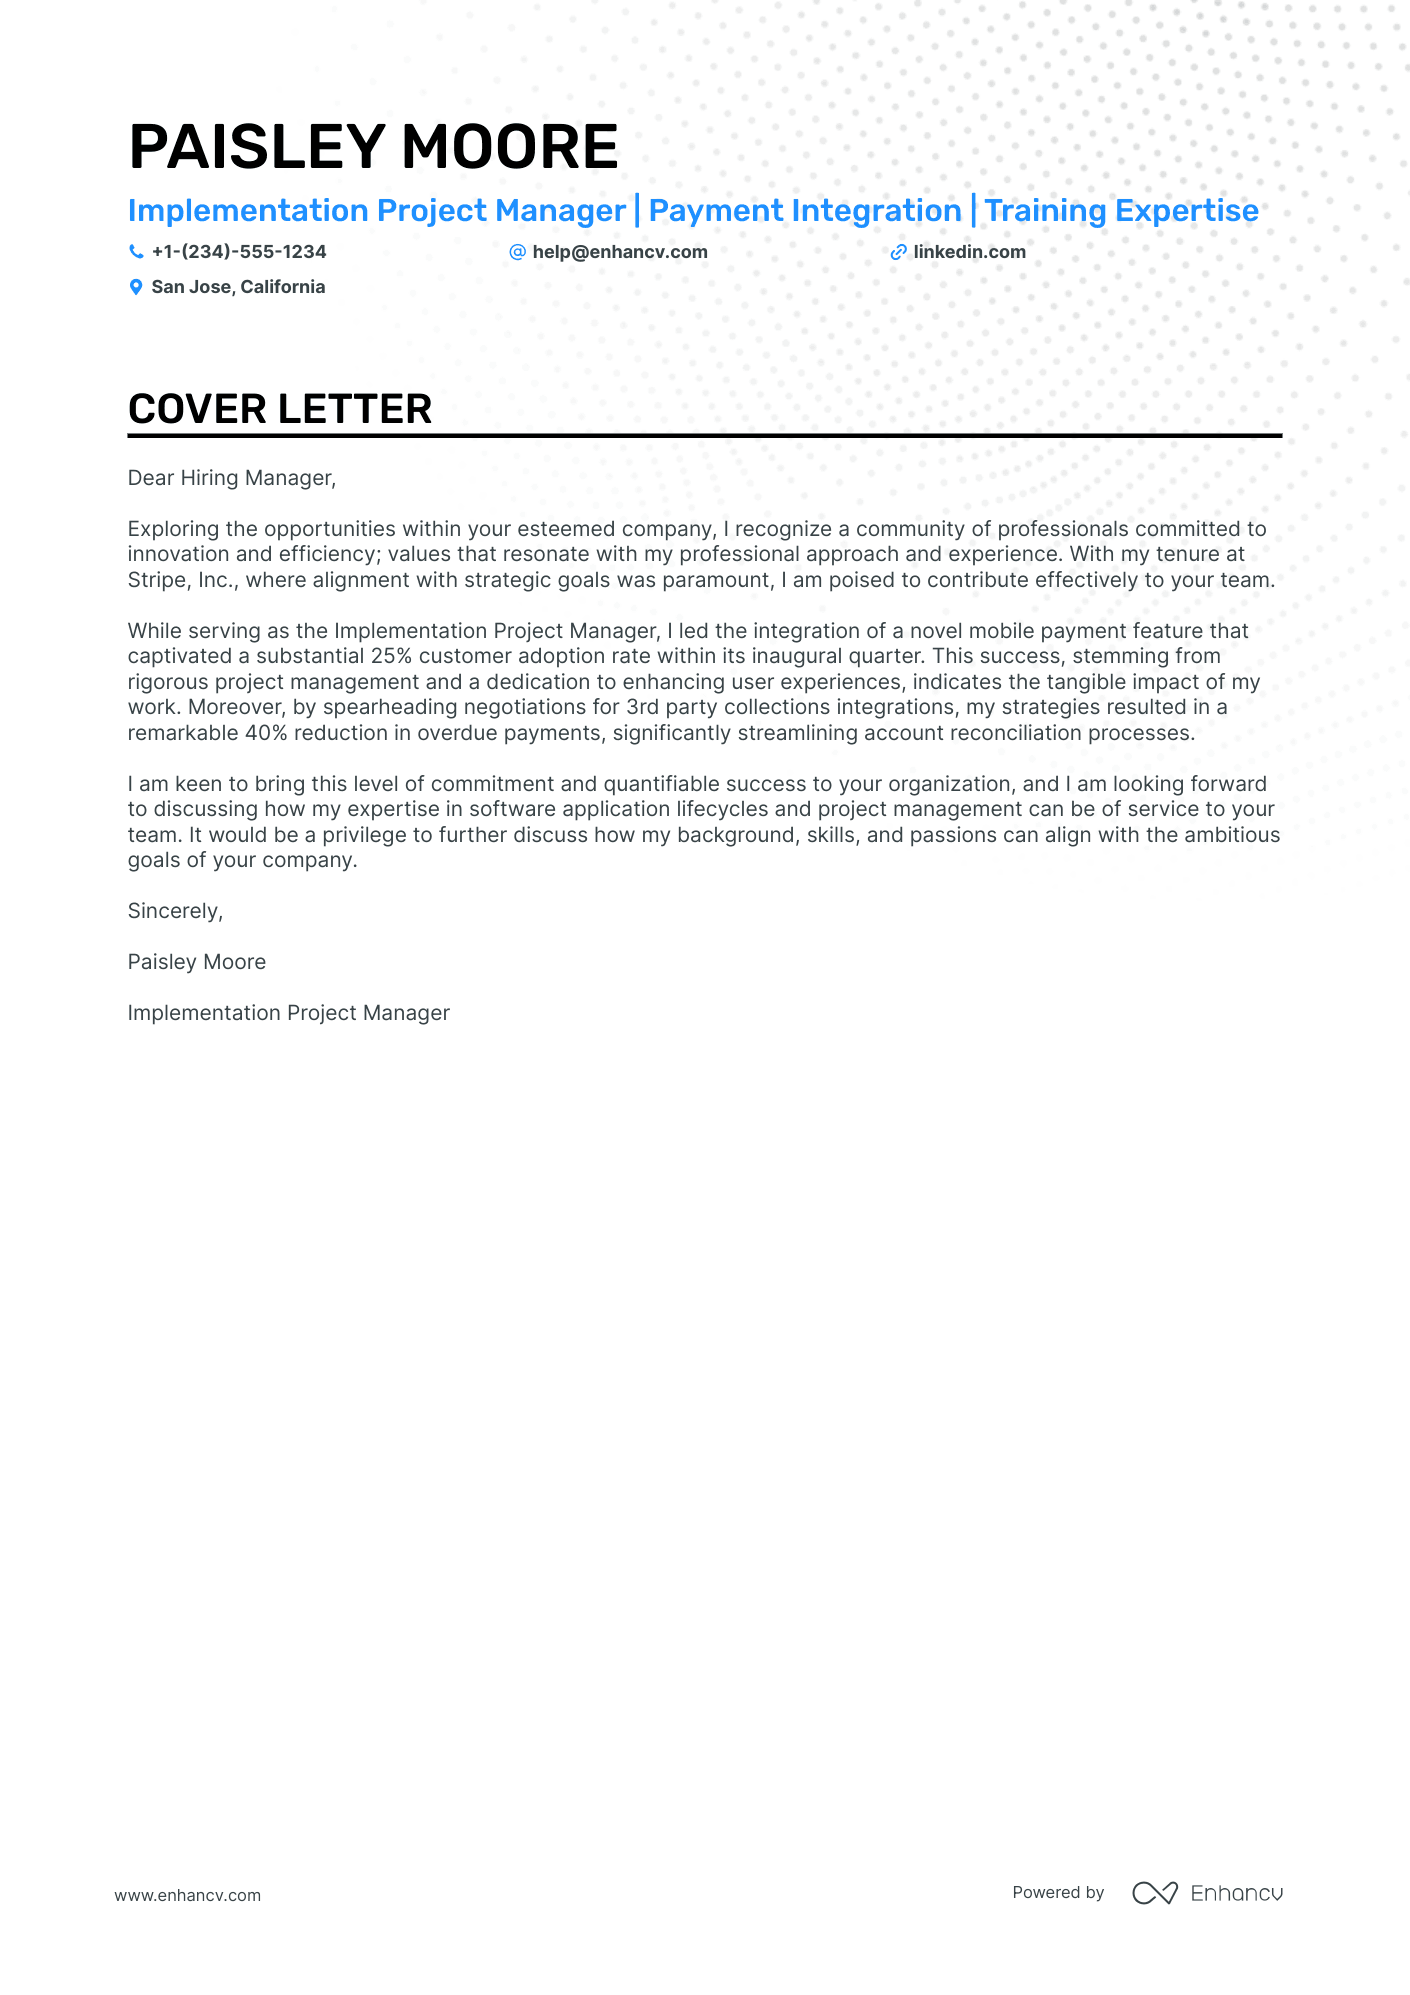 Implementation Project Manager cover letter